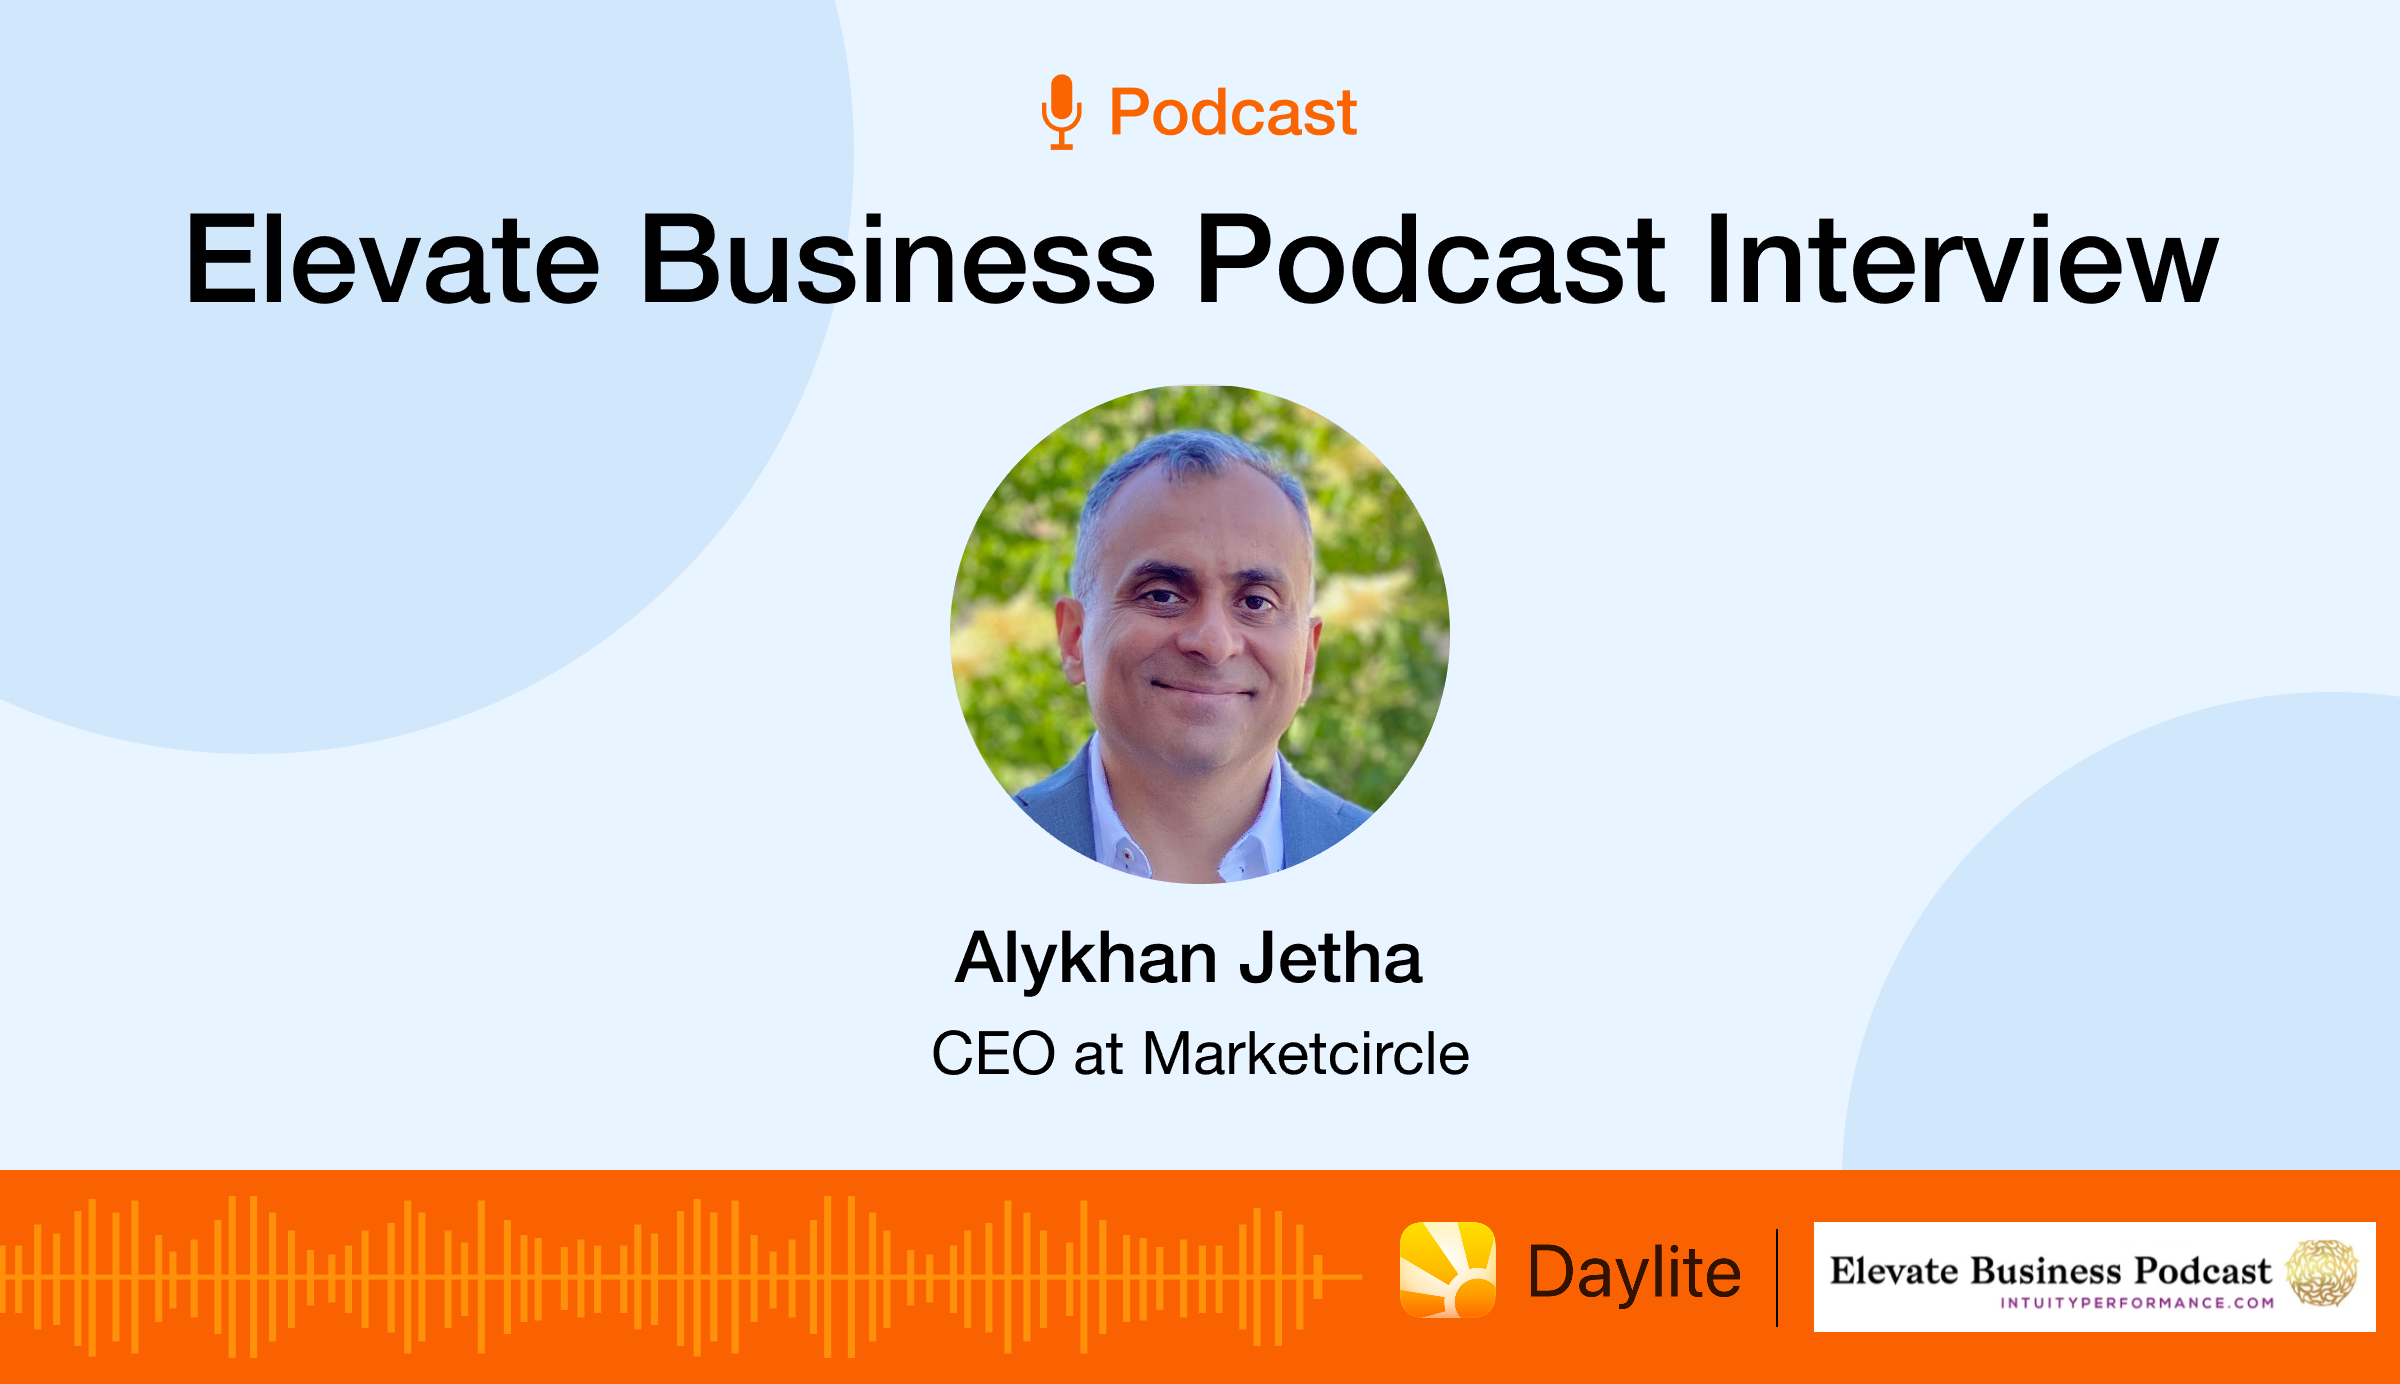 Image shows a grey background with a round shape at the centre, with AJ's photo inside. The header says "Elevated Business Podcast Interview" in black font, and the bottom shows the Elevate Business Podcast logo beside Daylite logo. 